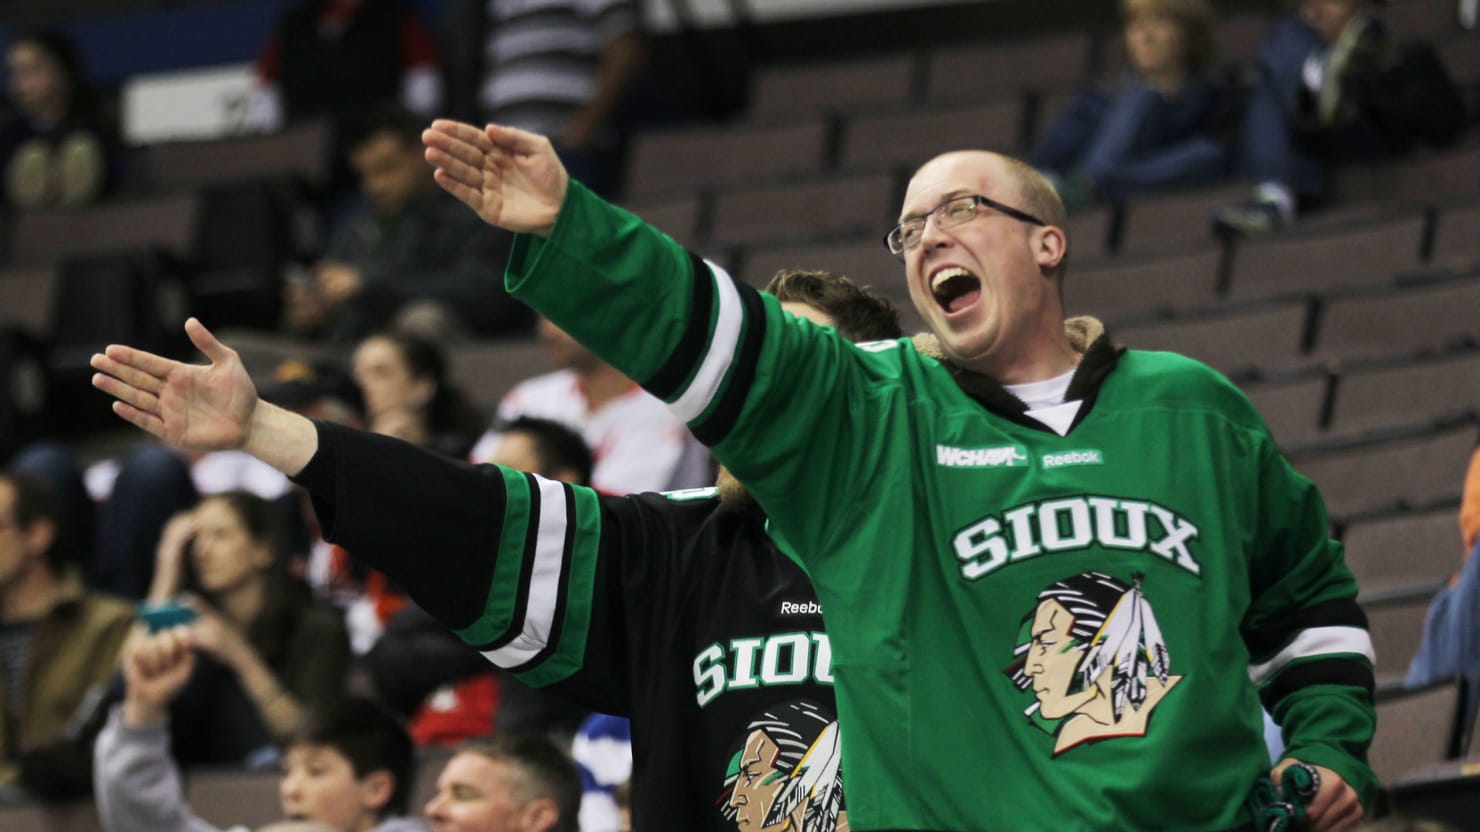 Fighting Sioux' out of sight but never out of mind at North Dakota